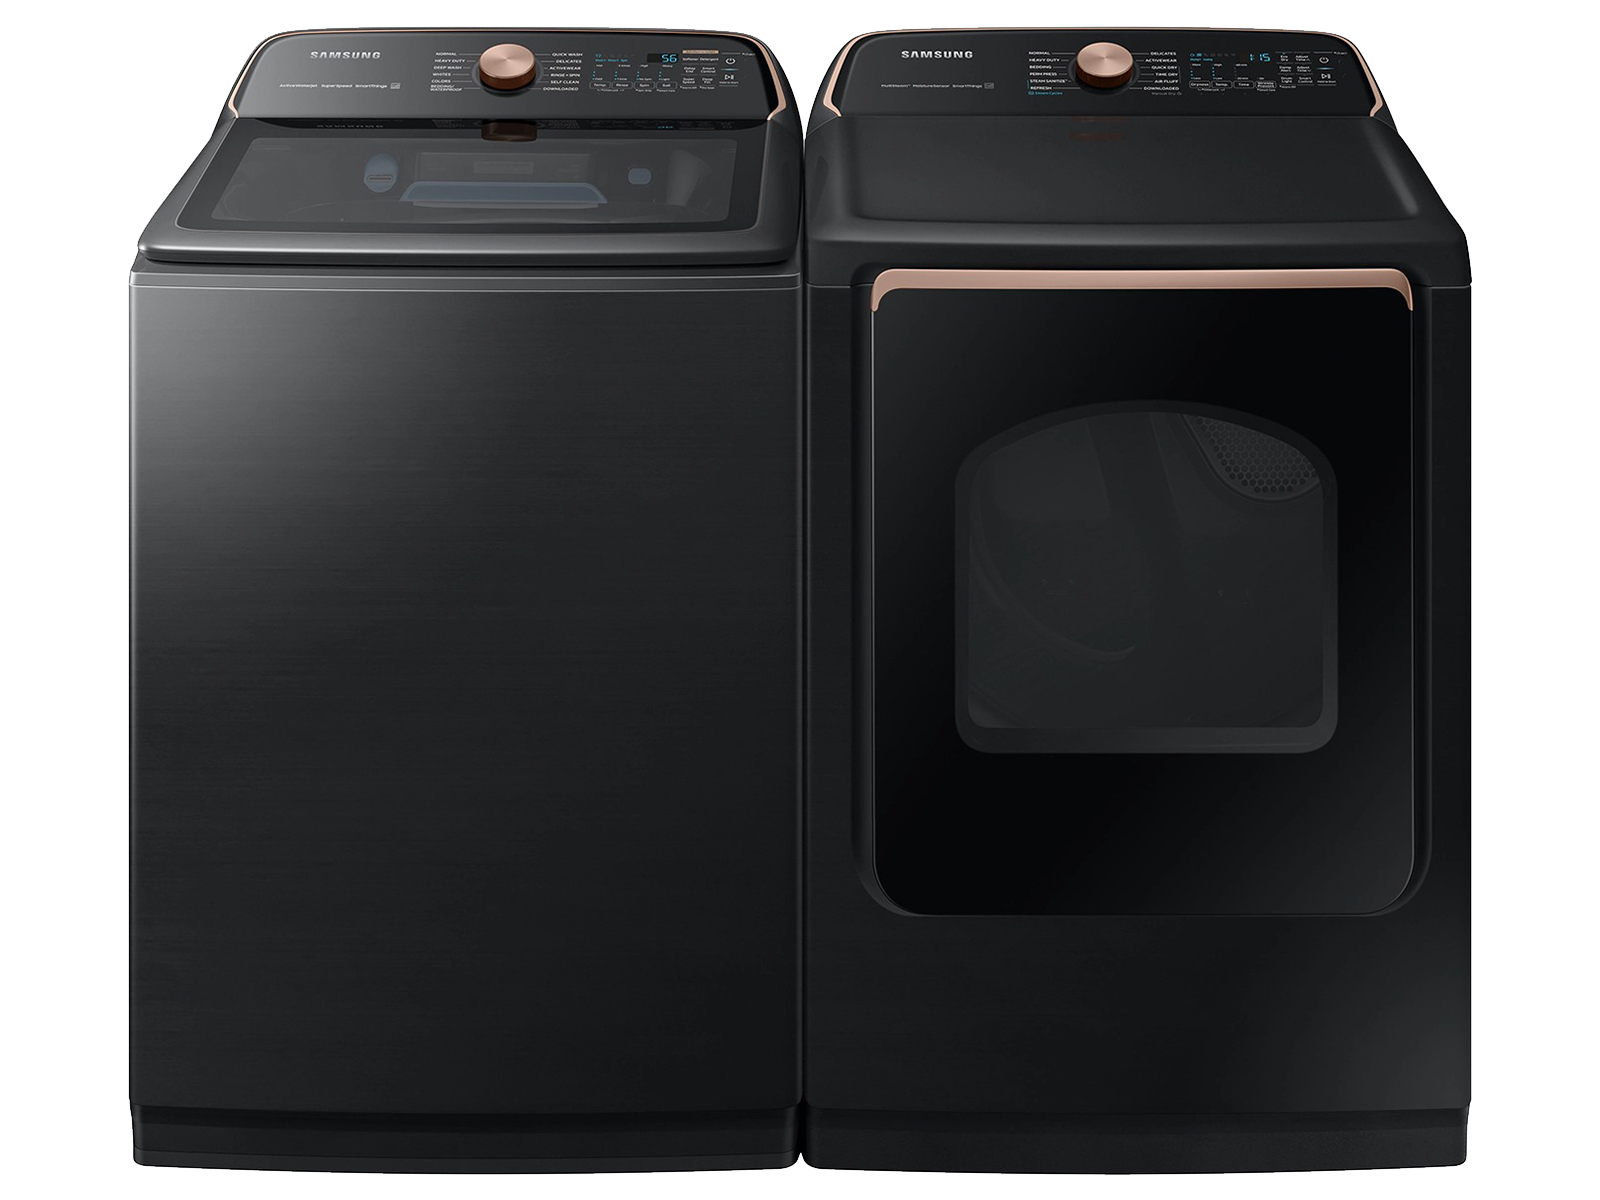 Photos - Washing Machine Samsung Smart Top Load Smart Washer and Steam Sanitize+ Electric Dryer pac 